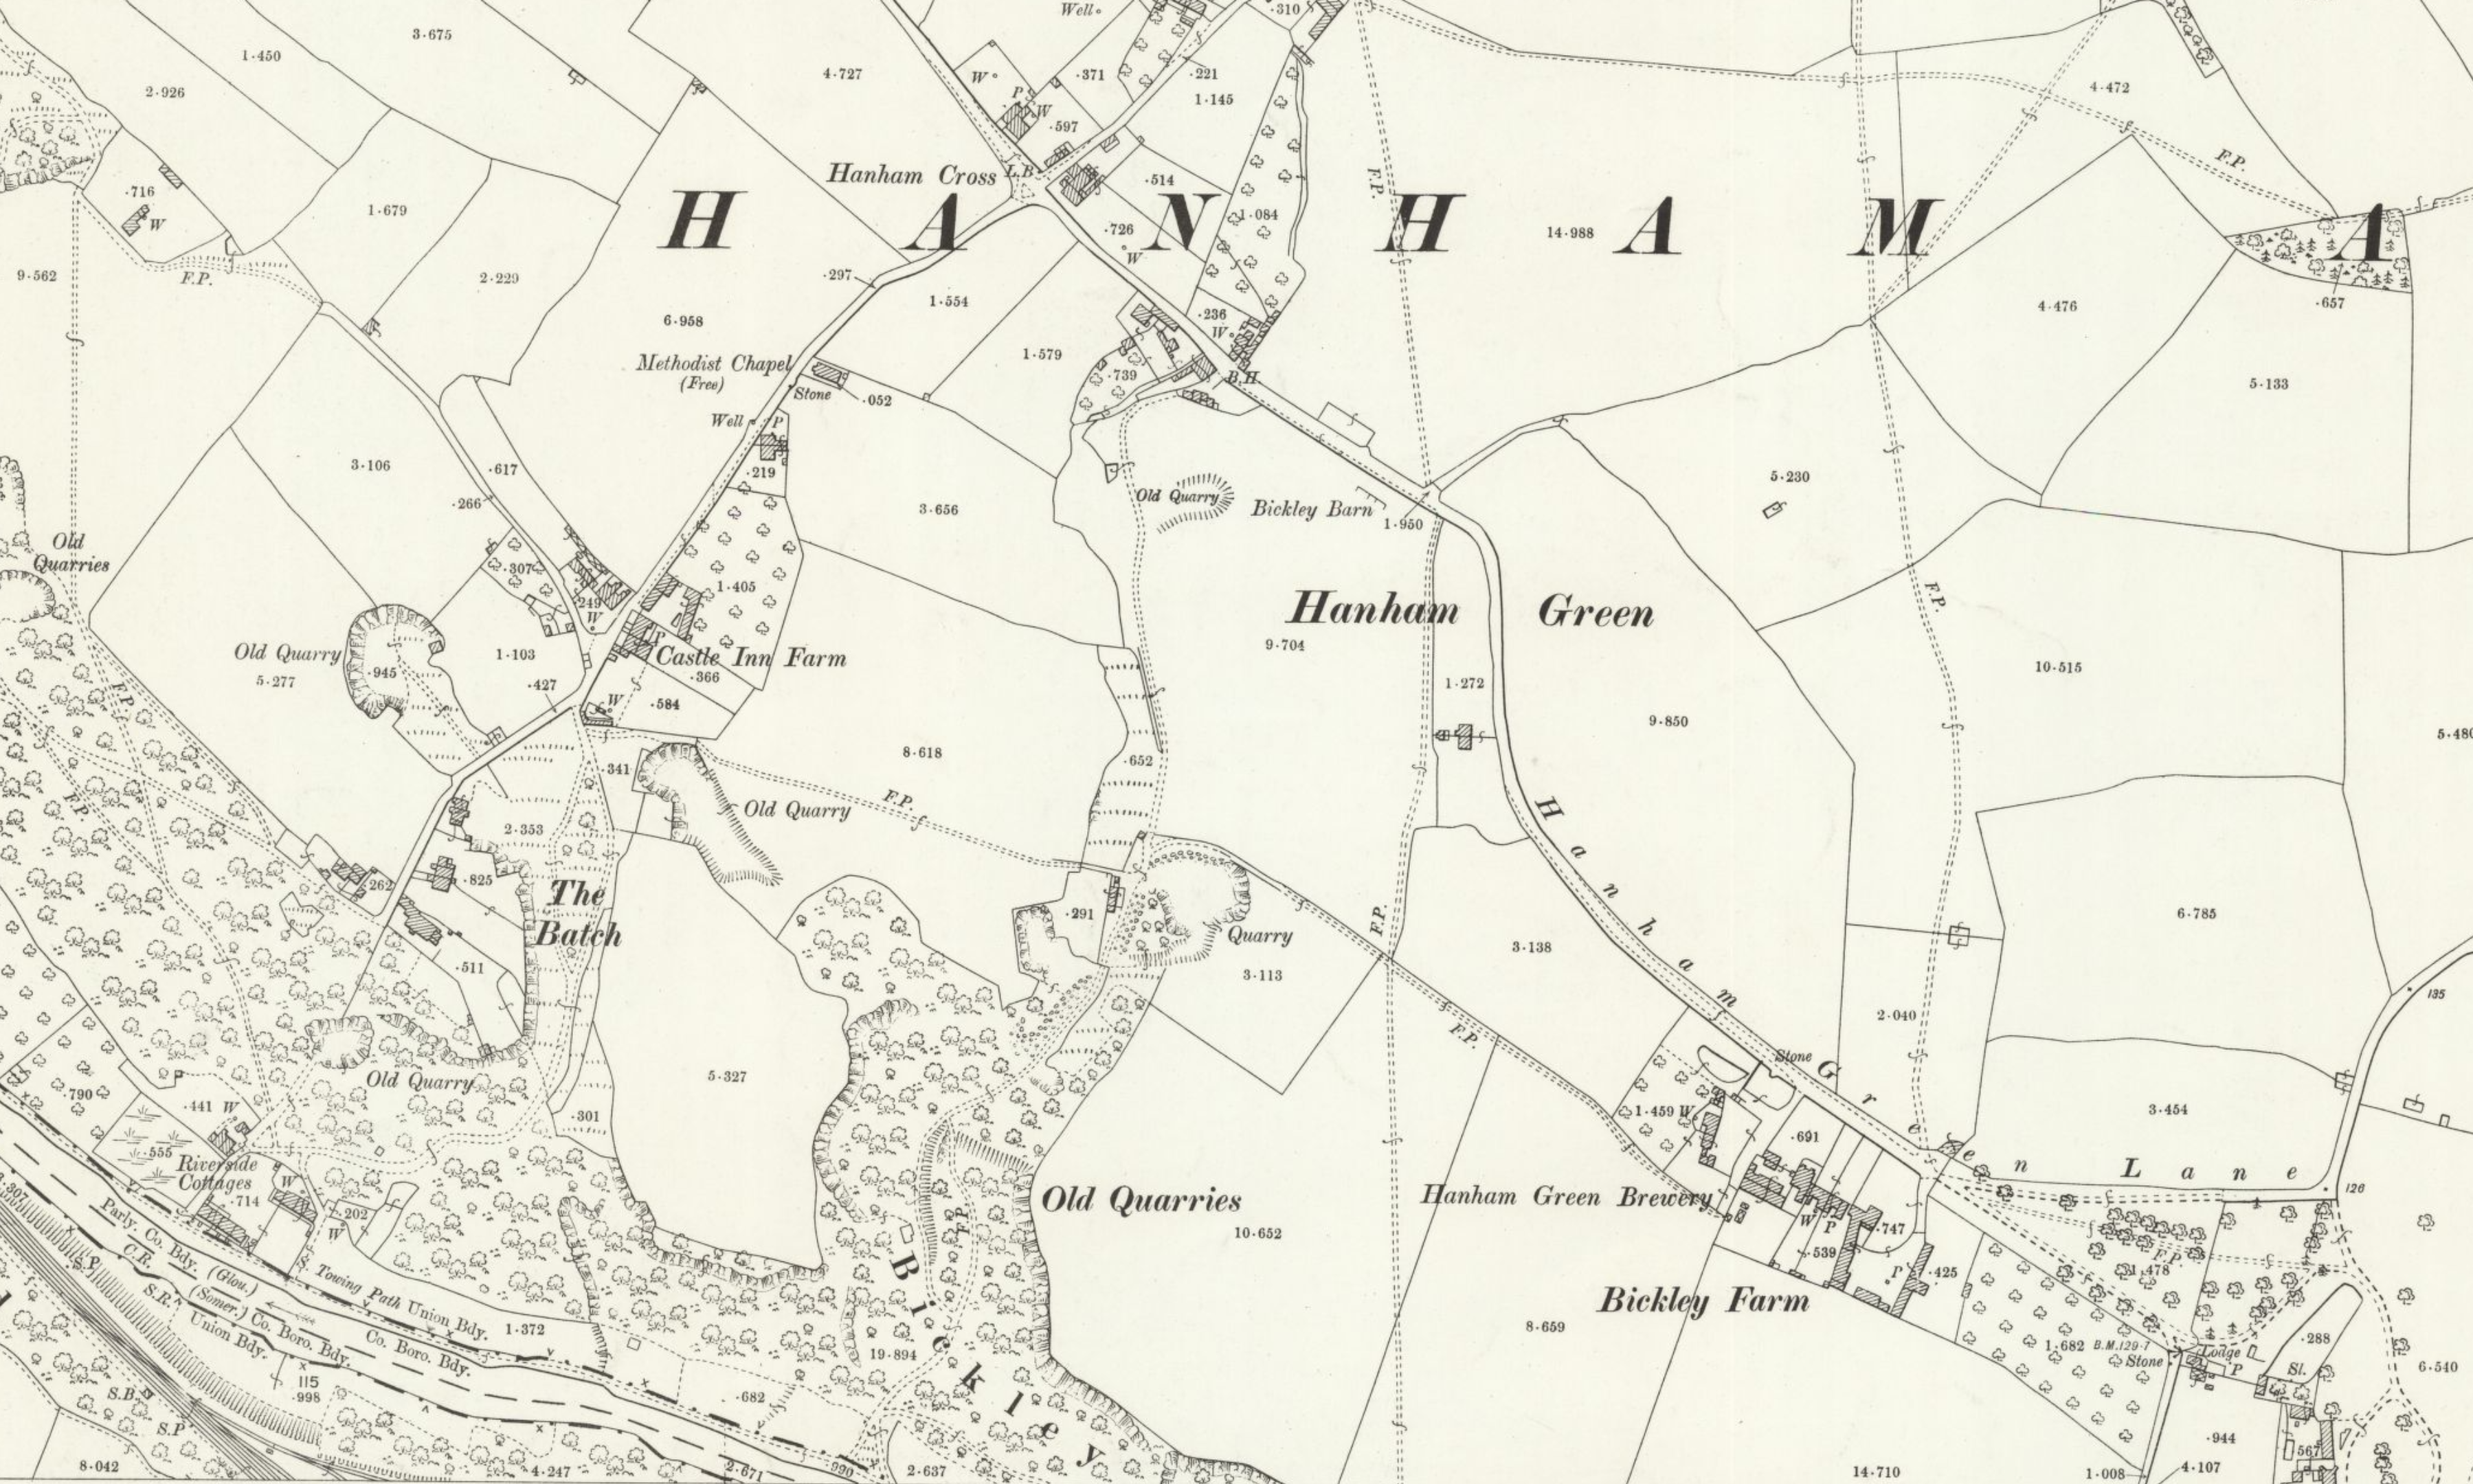 Figure 2: 1902 Map of Hanham Green showing Castle Inn Farm and the Batch